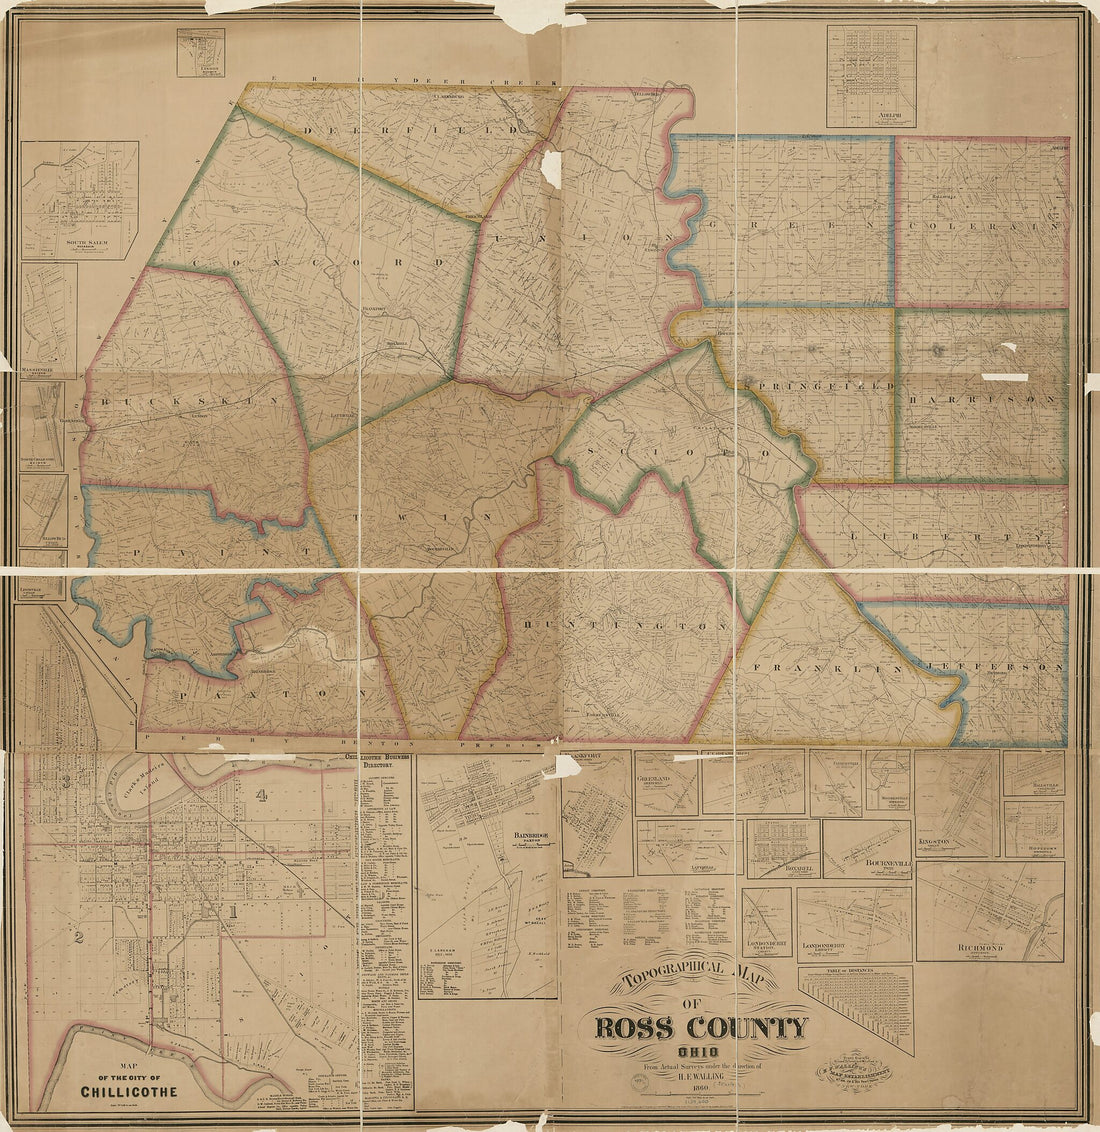 This old map of Topographical Map of Ross County, Ohio from 1860 was created by  H.F. Walling&